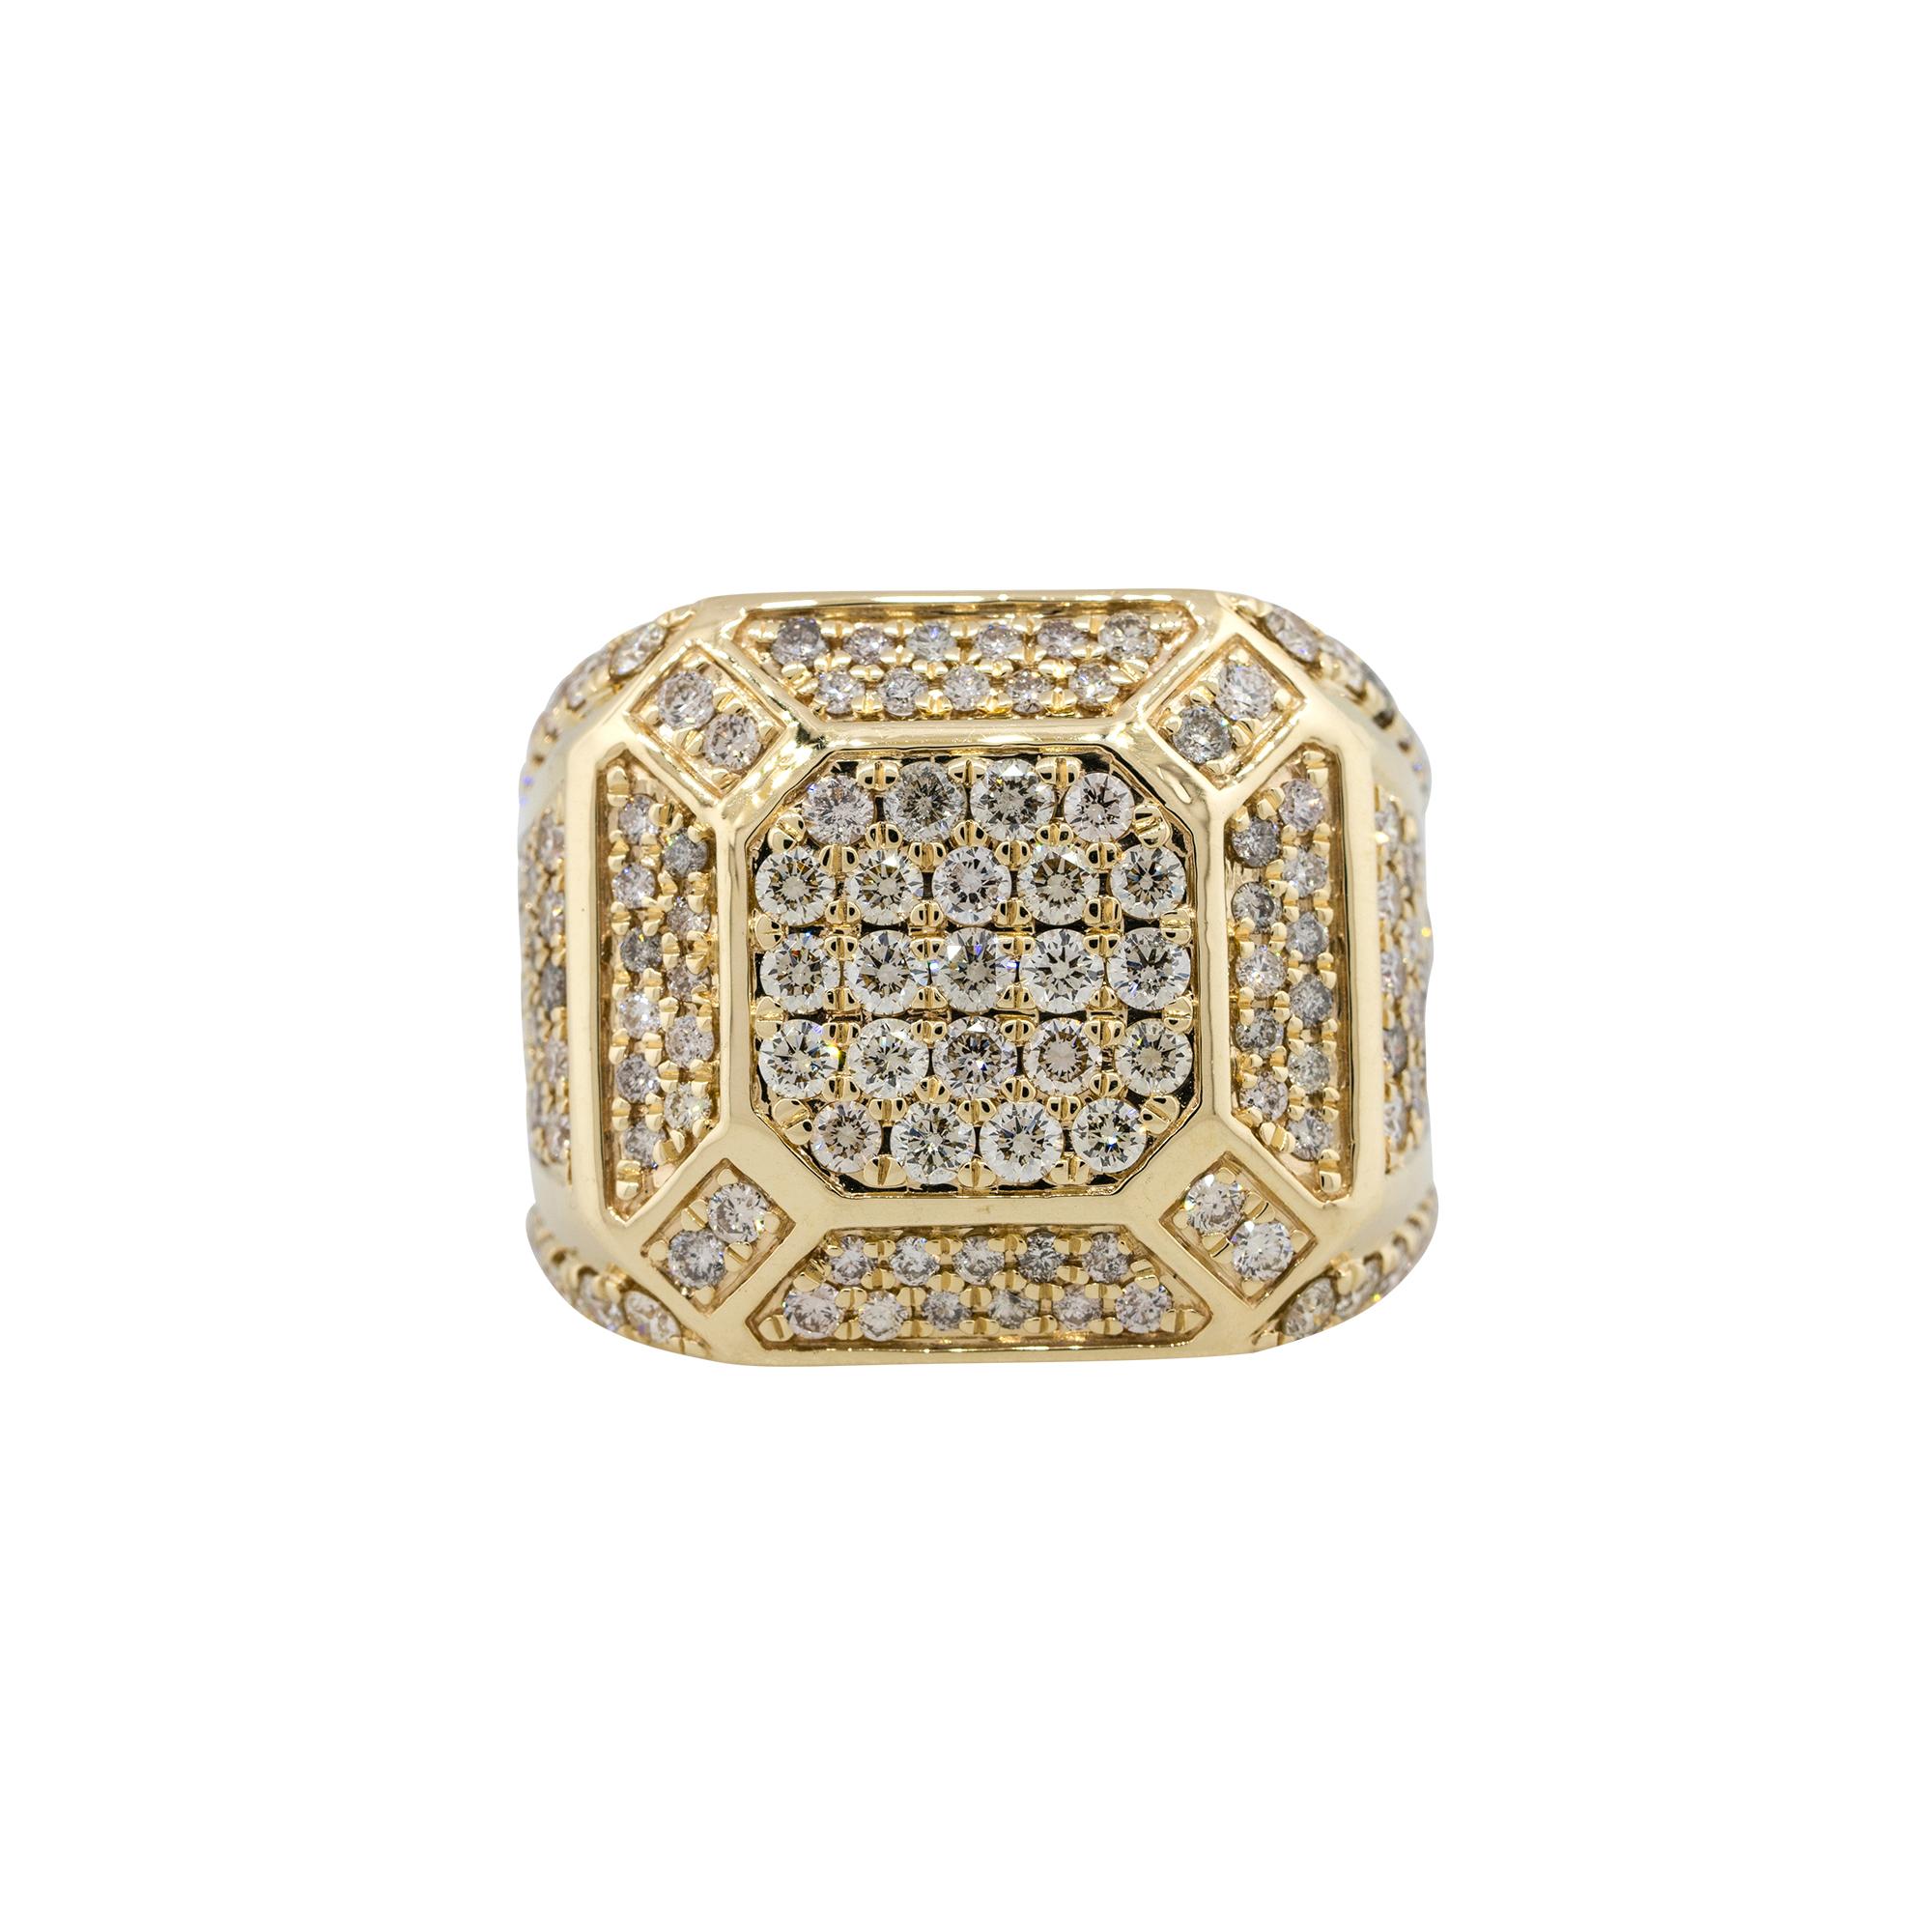 Material: 14k Yellow Gold
Diamond Details: Approx. 4ctw of round cut Diamonds. Diamonds are G/H in color and VS in clarity
Size: 10
Measurements: 27 x 22 x 28mm
Weight: 15g (9.6dwt)
Additional Details: This item comes with a presentation box!
SKU: